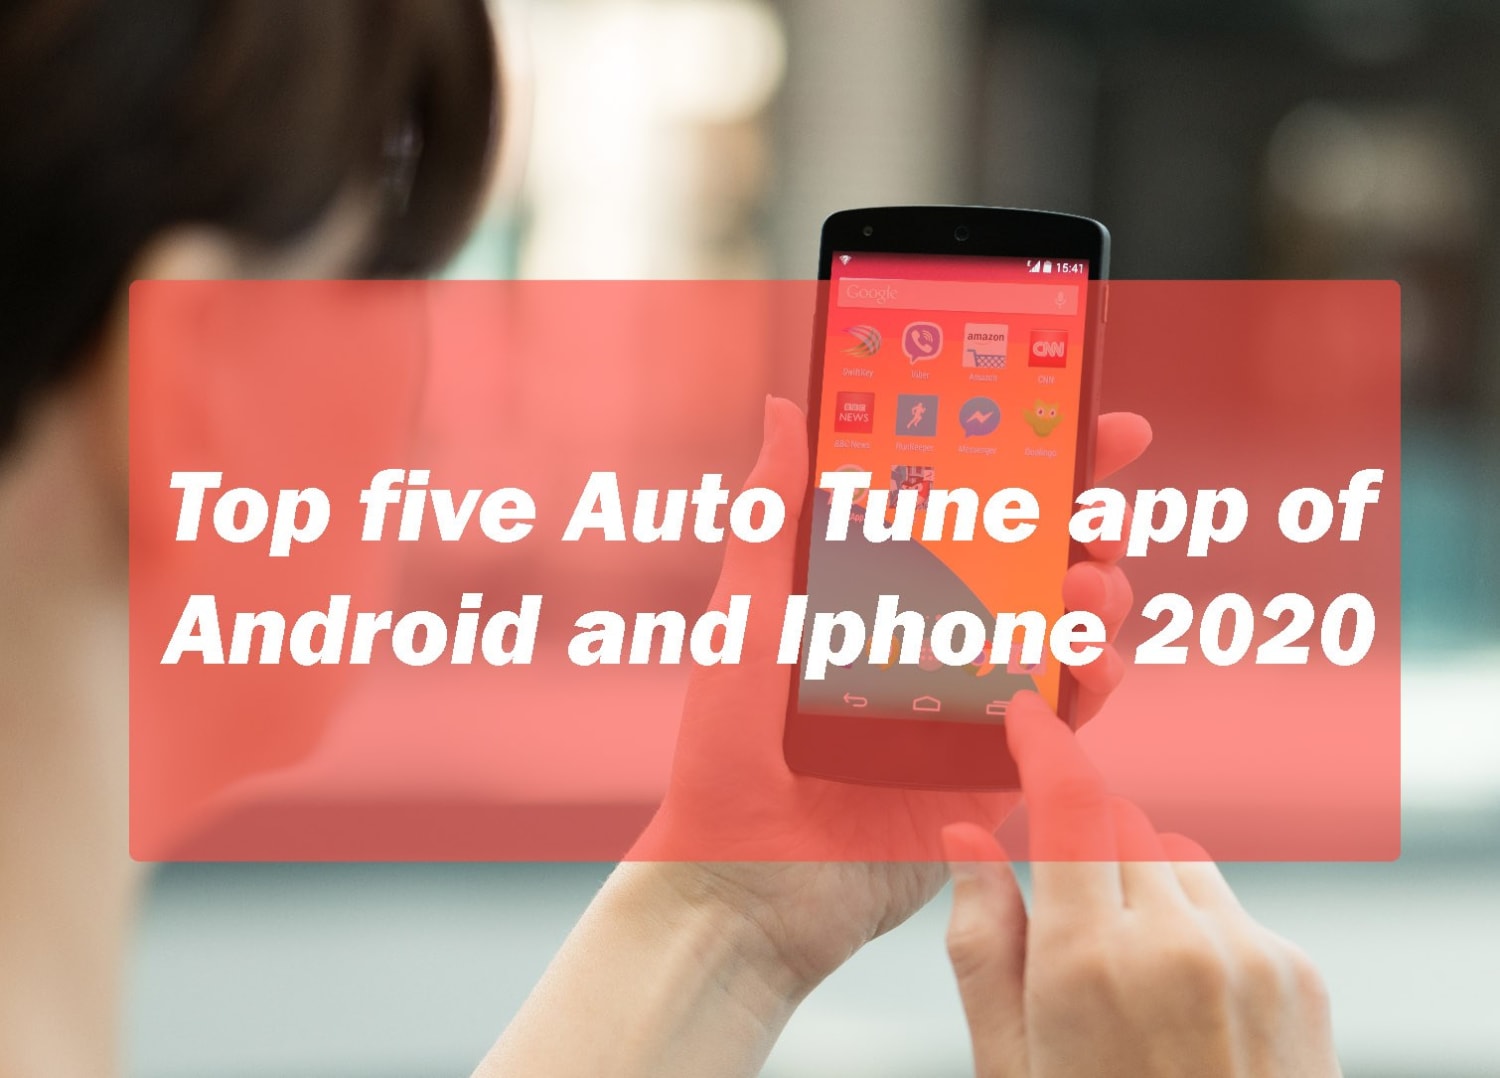 Top five Auto Tune app of Android and Iphone 2020